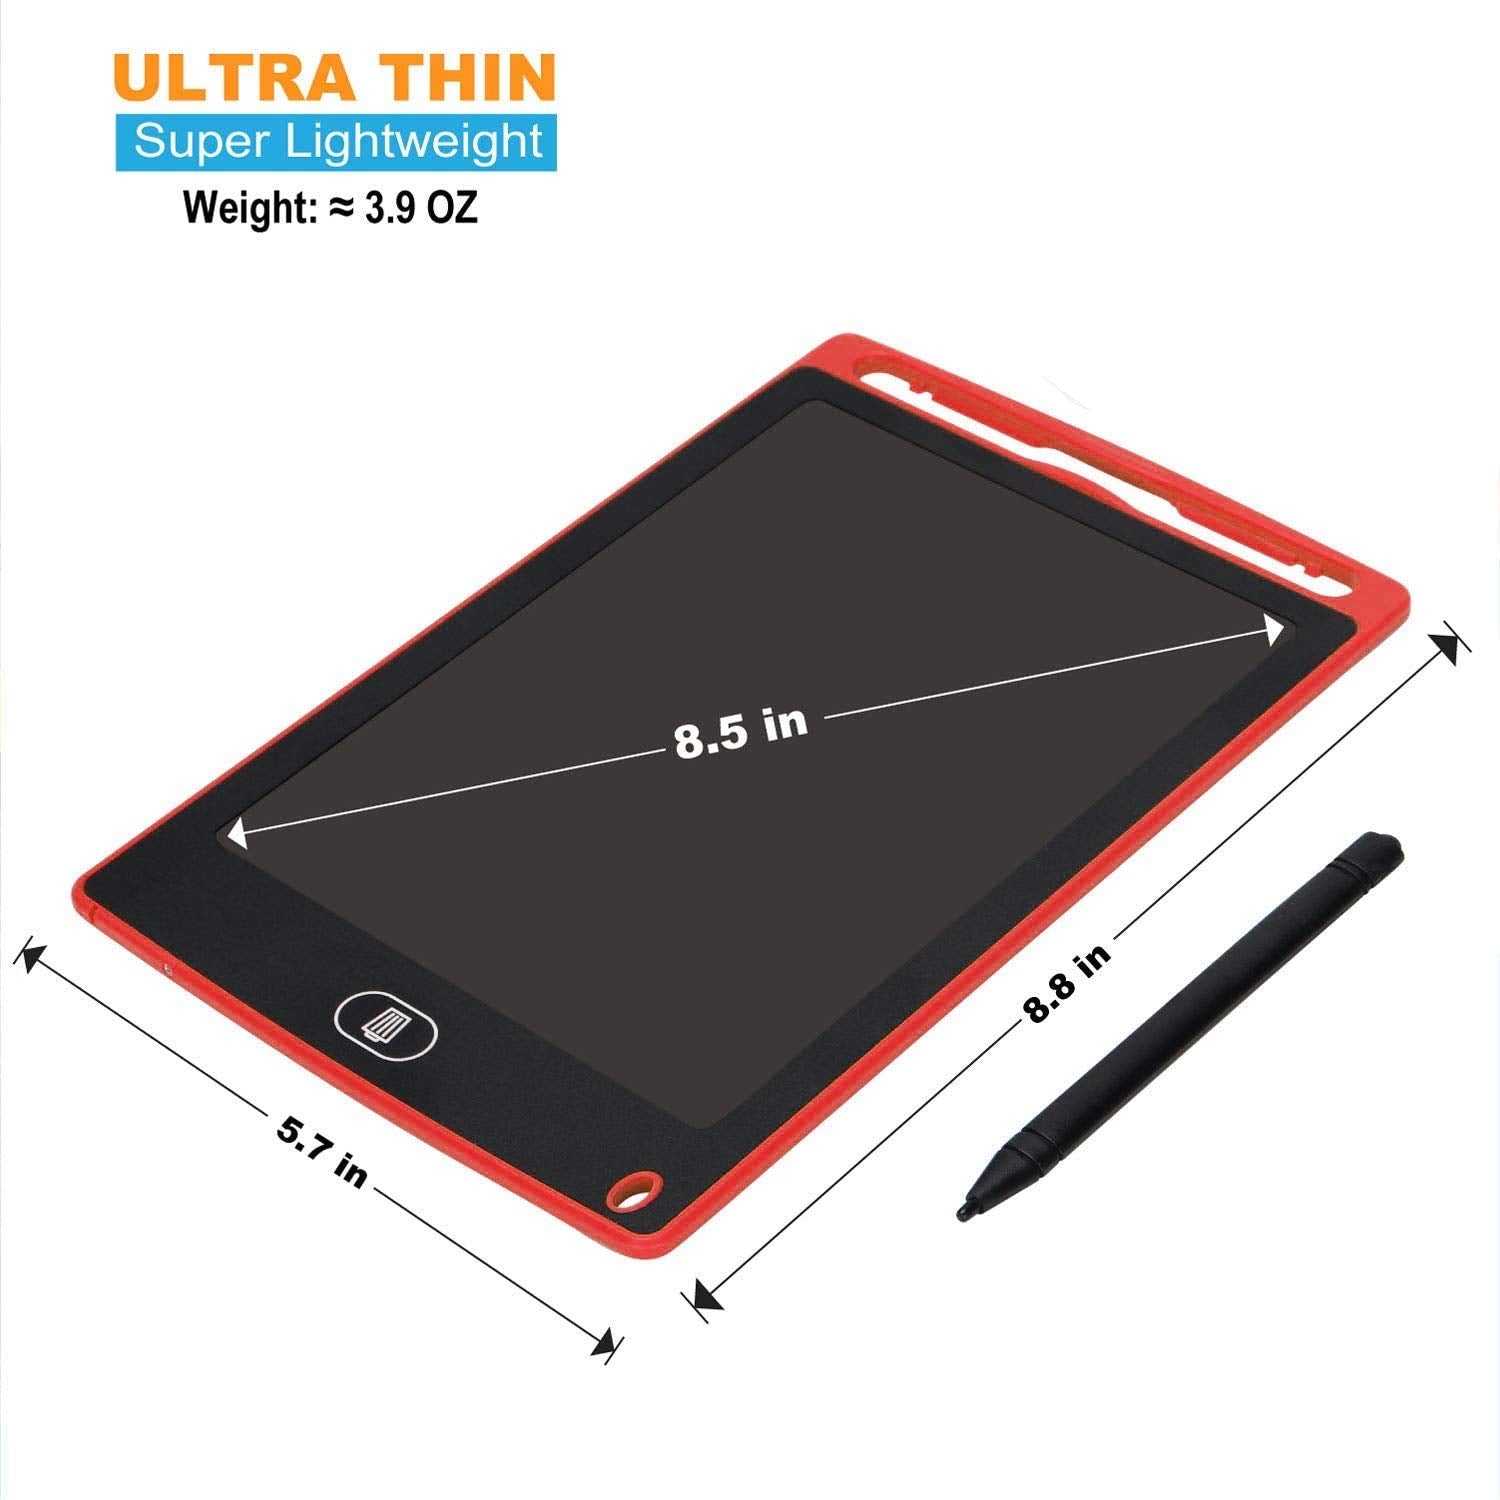 LCD Writing Tablet 8.5 inch